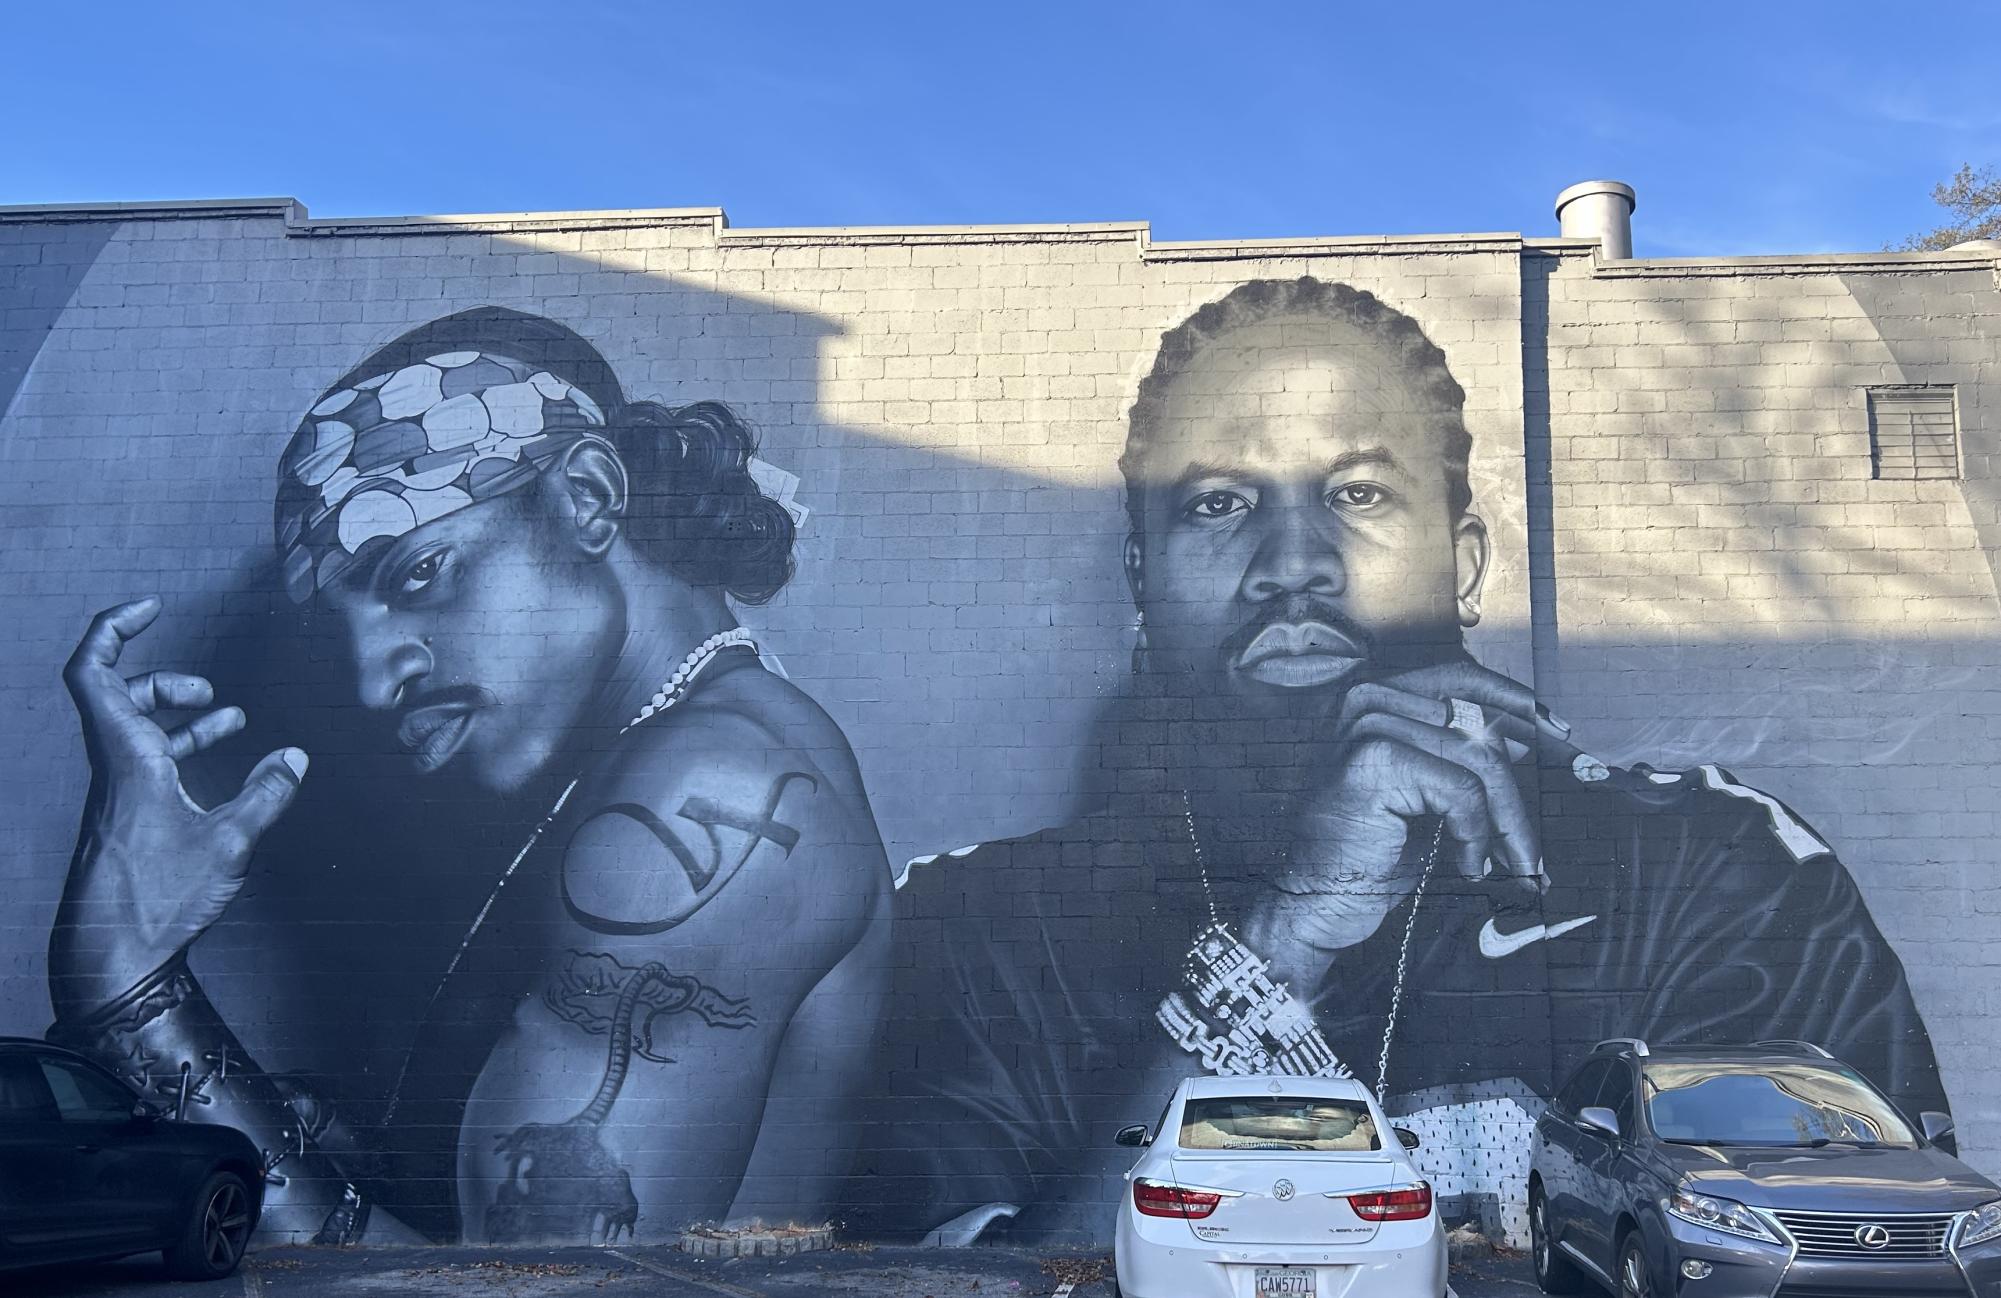 Atlanta’s hip-hop movement was not always as prominent as it is today. Originally, the Bronx and Los Angeles were seen as the forefronts of hip-hop. However, Atlanta artists have played a role in making Atlanta a key influencer of hip-hop across the U.S. 